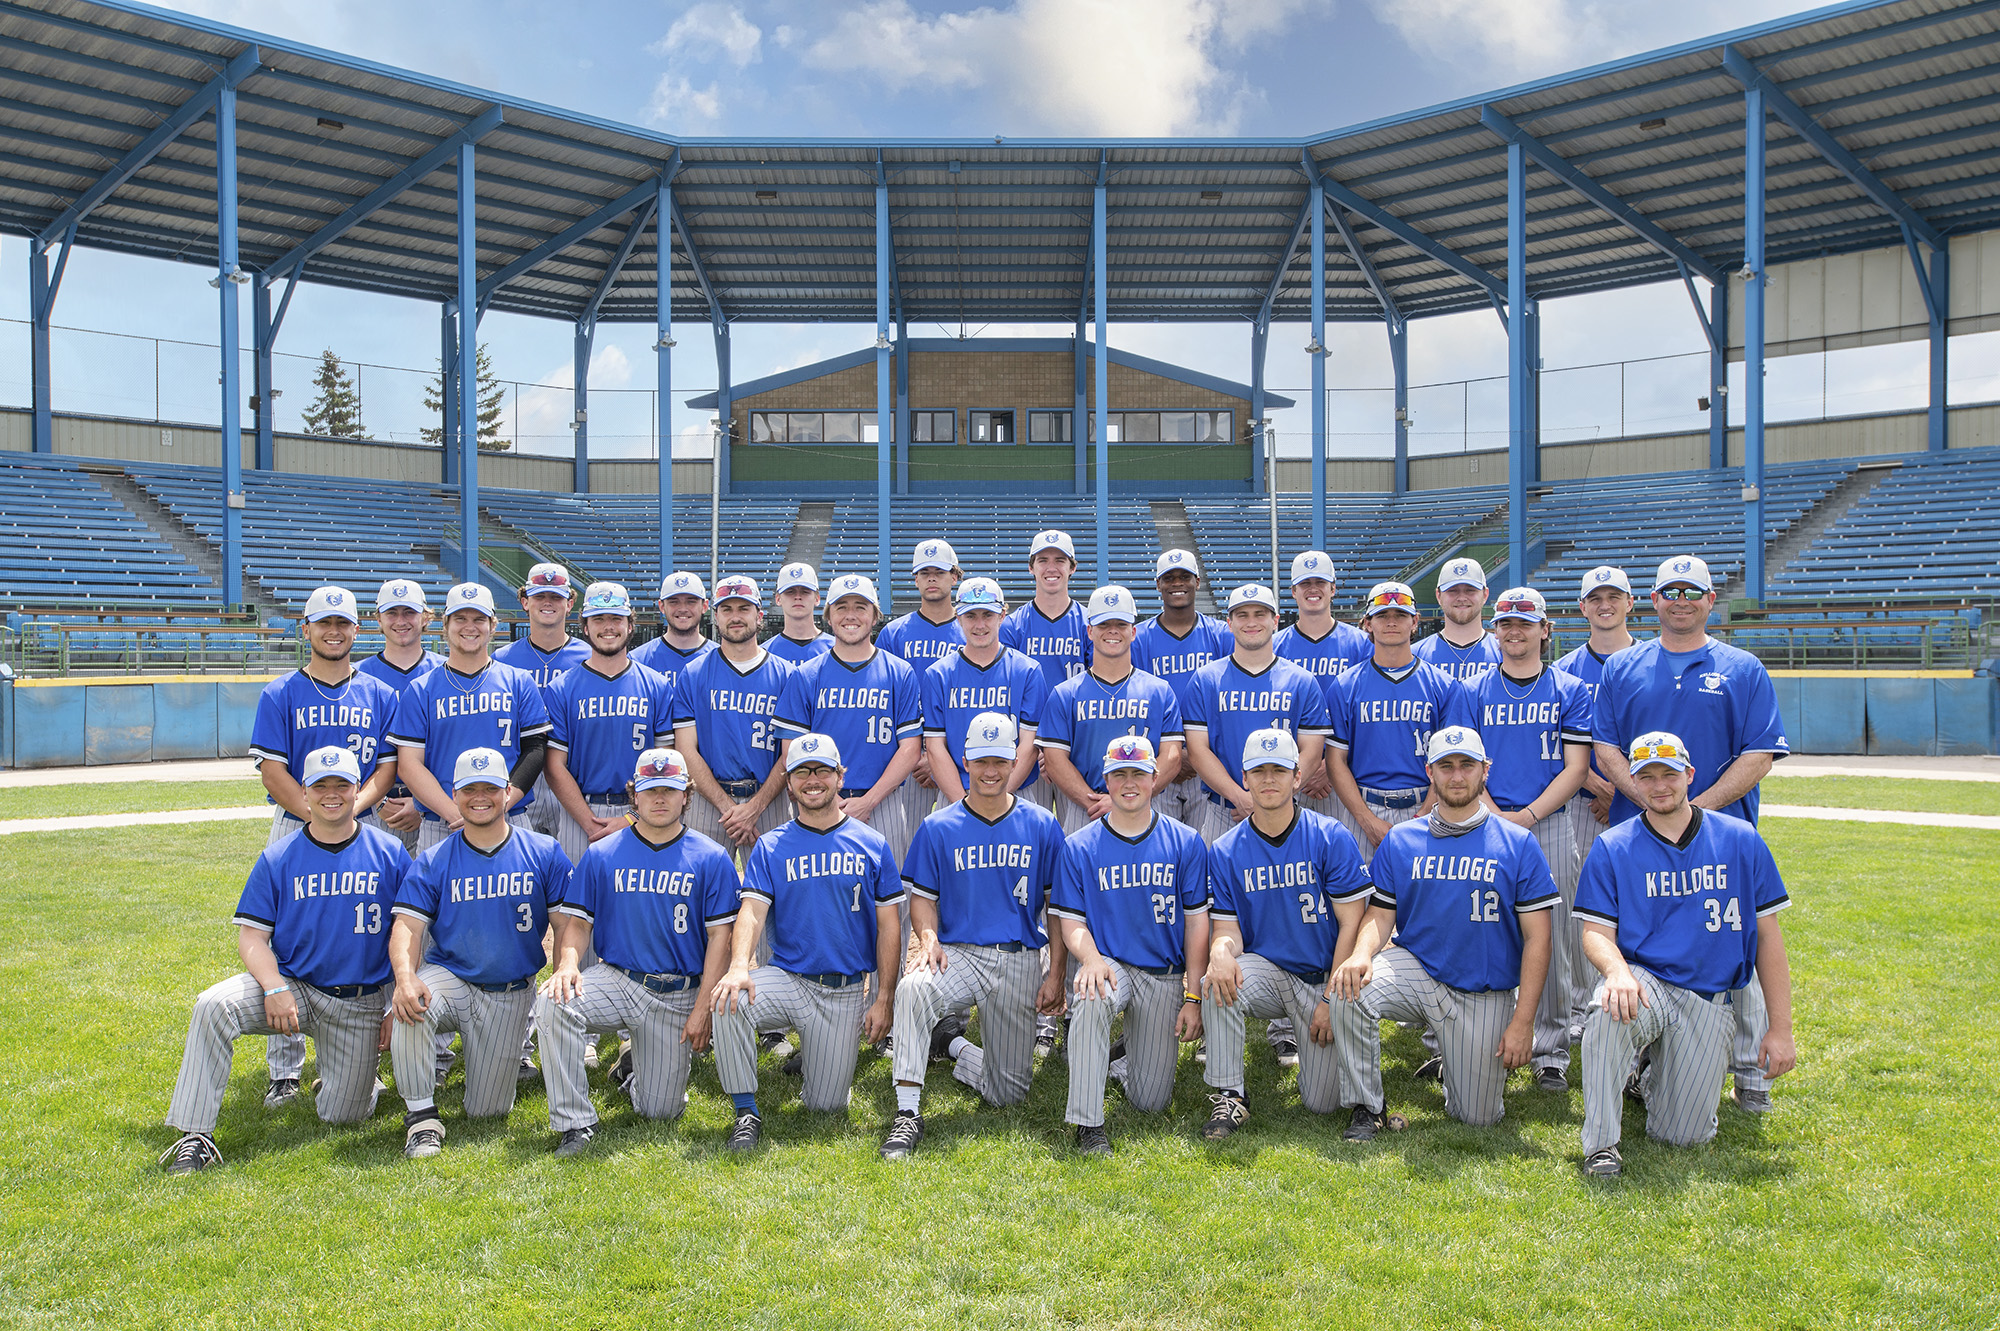 KCC baseball finishes third in the nation at NJCAA Division II World Series